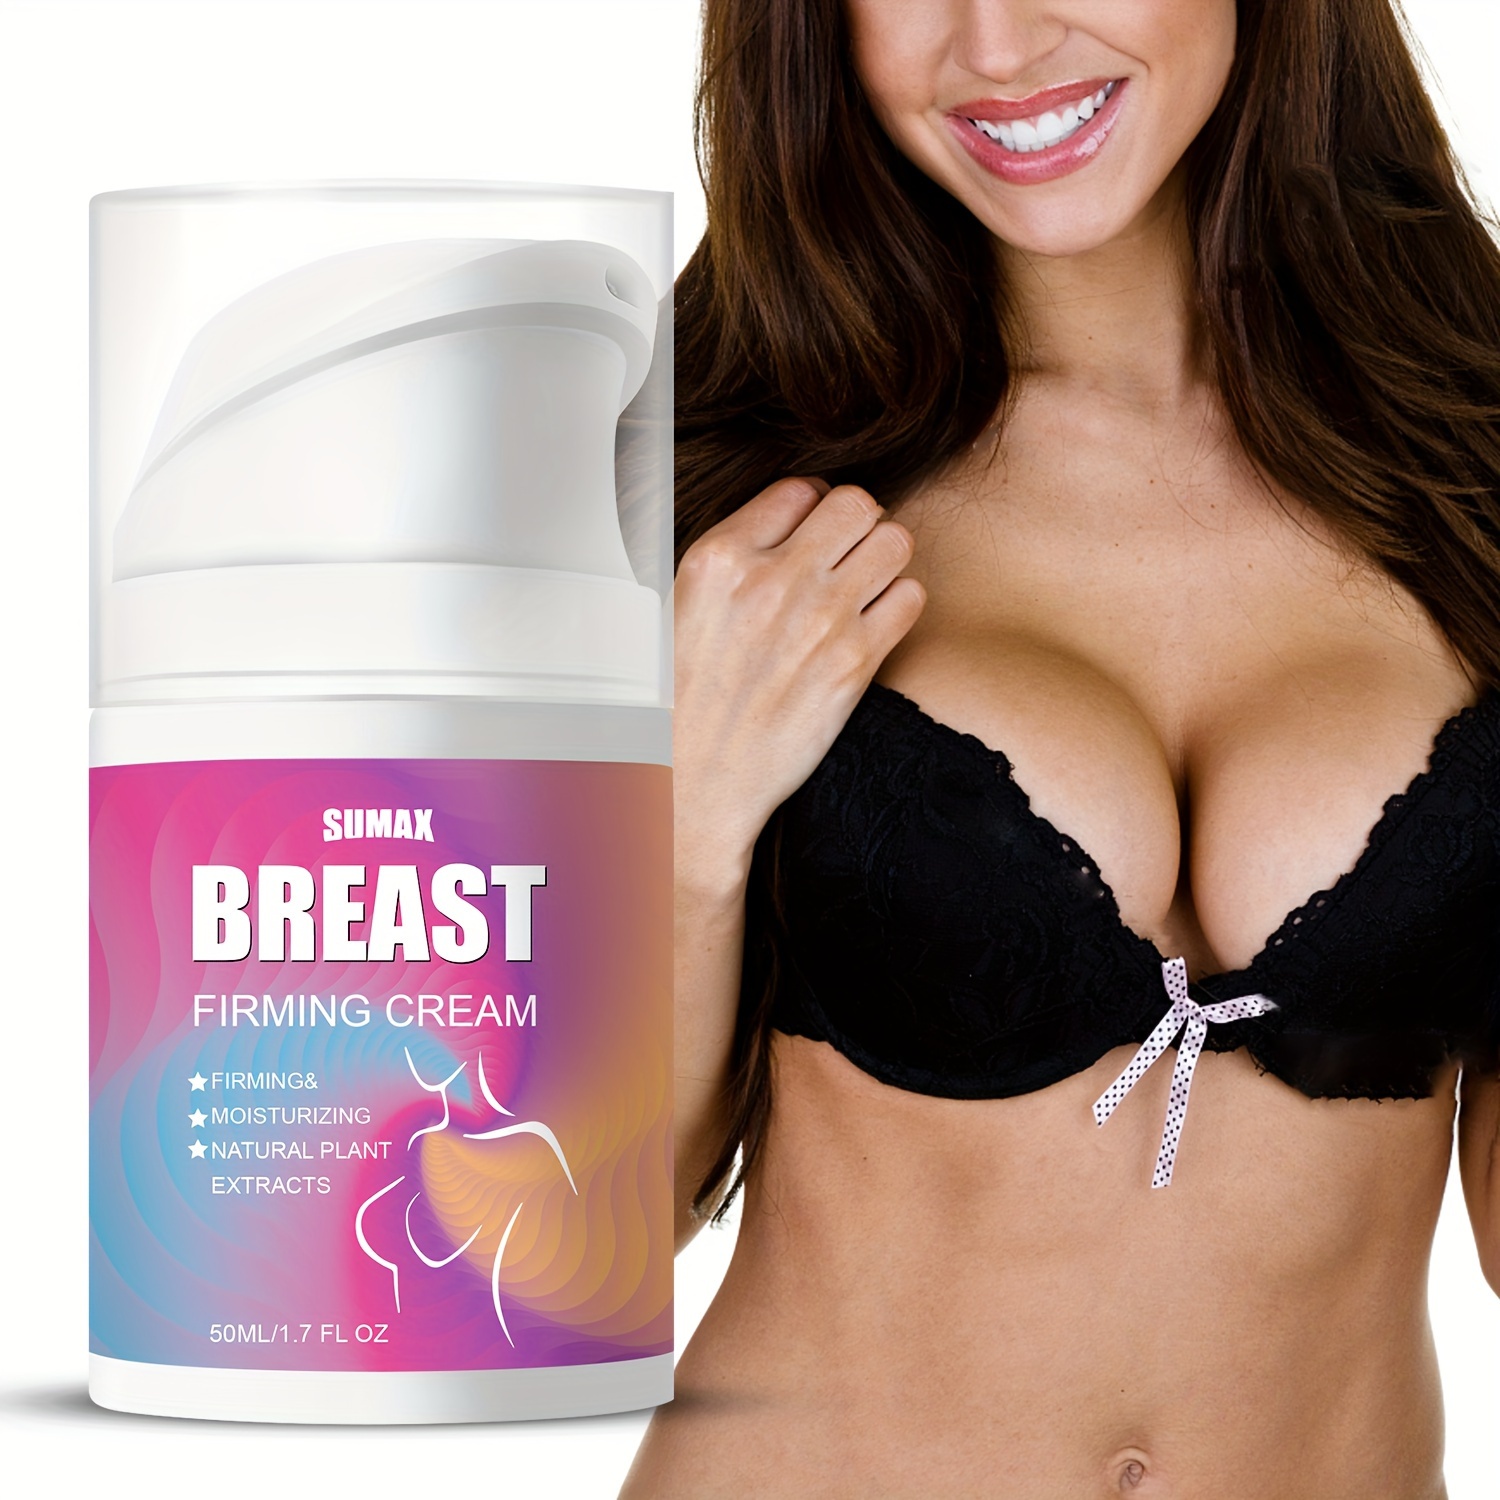  Breast Enhancement Cream, Papaya Essence Cream, Firming and  Lifting Cream Nourishing for Breast Growth, for Bigger Fuller Breasts  Perfect Body Curve for All Skin Types (3PC) : Beauty & Personal